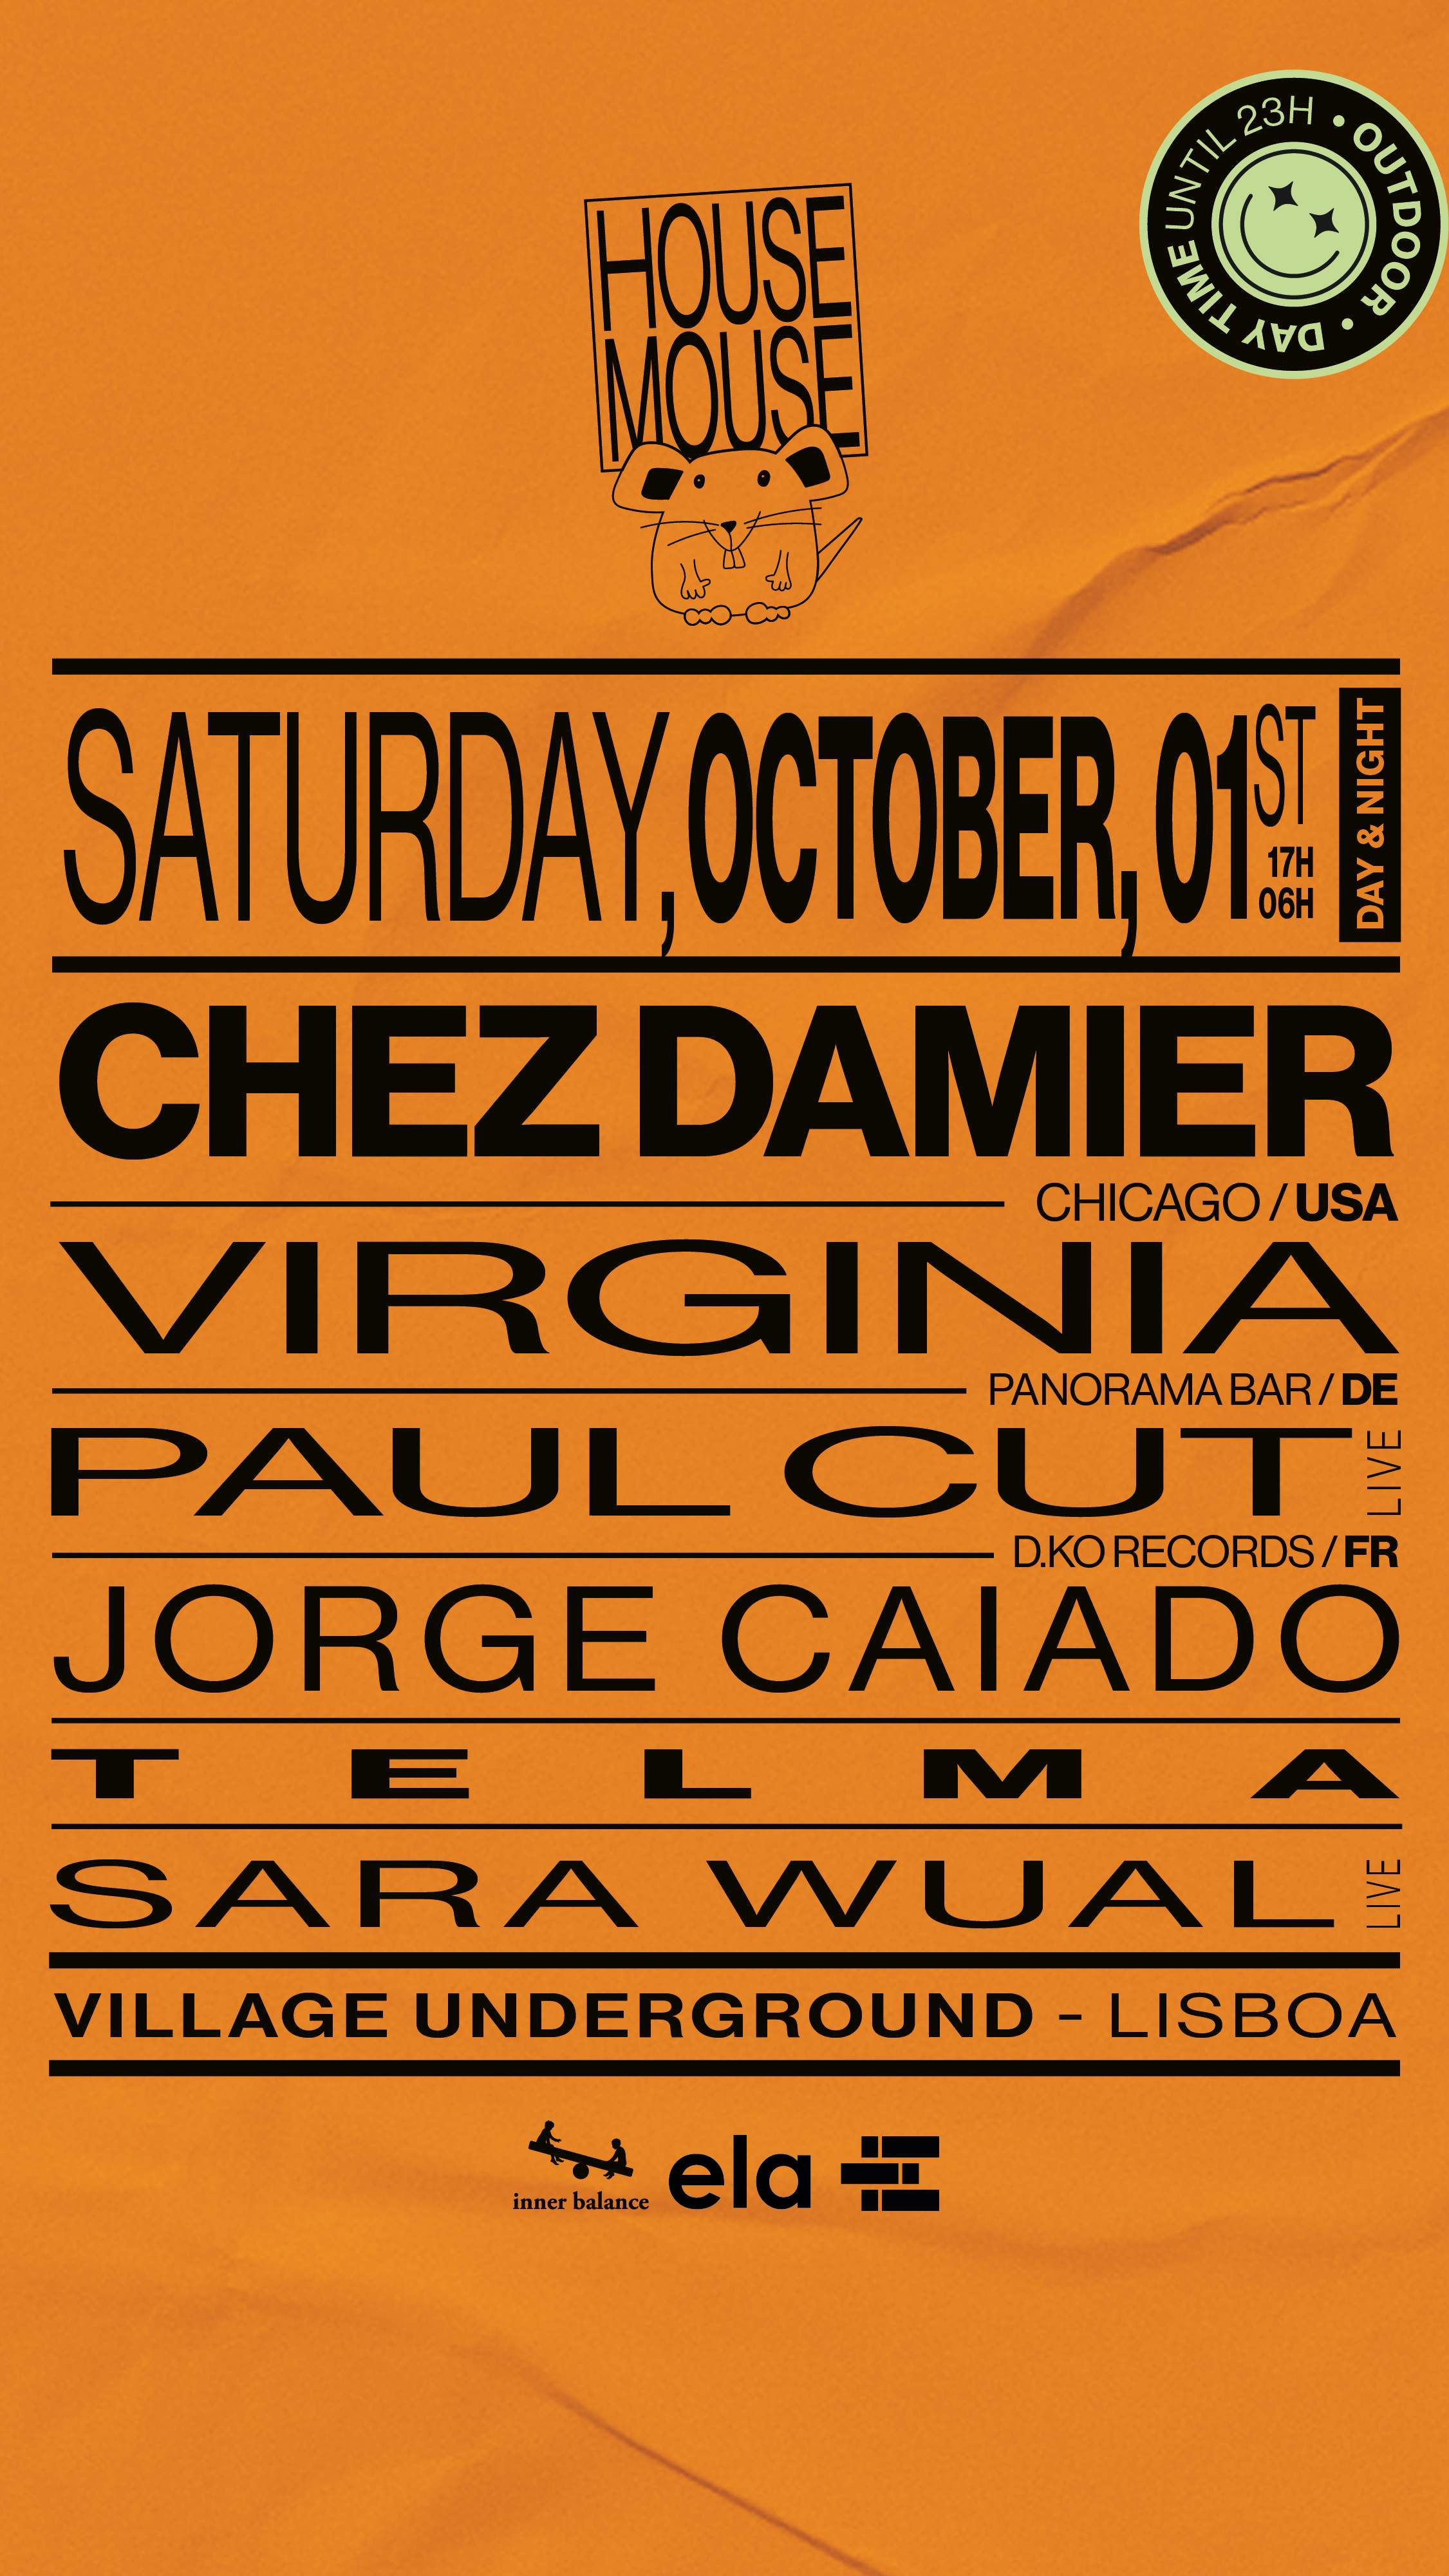 House Mouse with Chez Damier + Virginia (Day & Night) - Flyer front